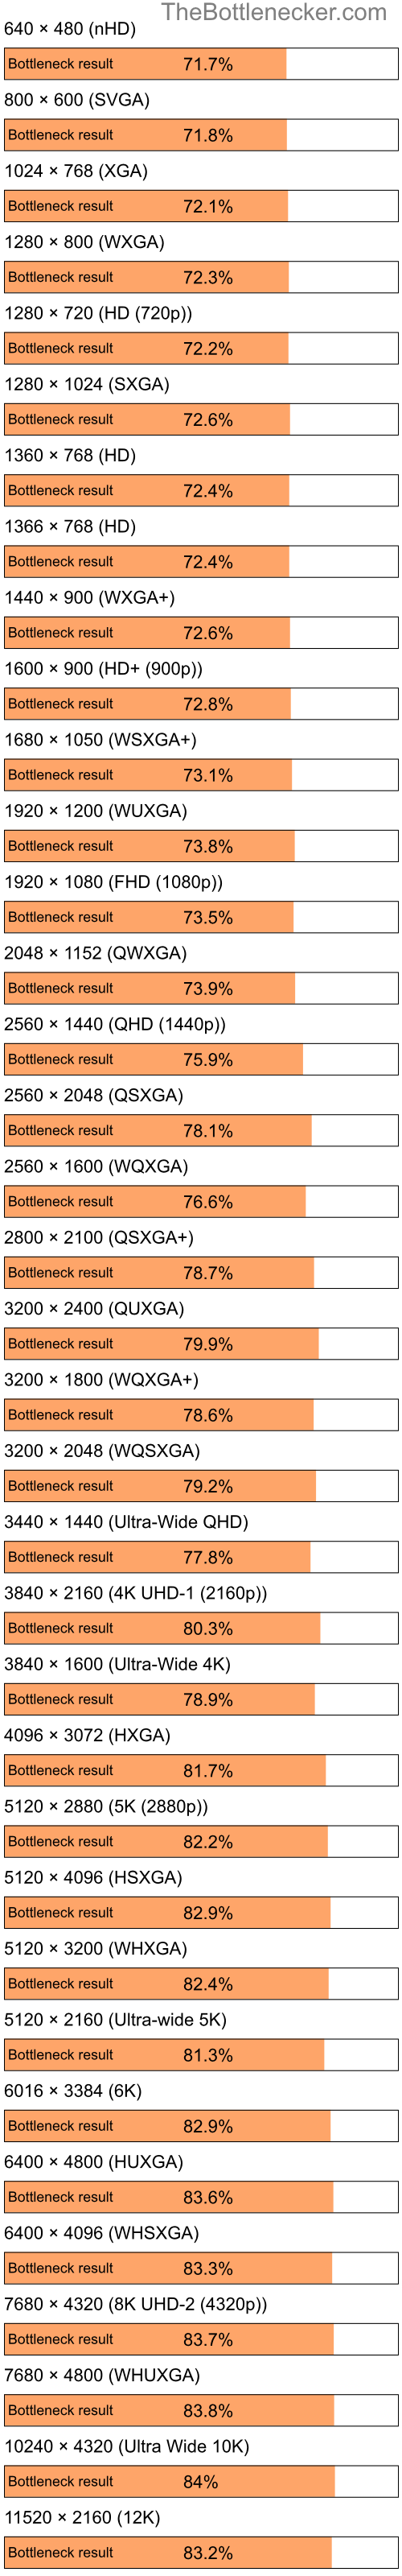 Bottleneck results by resolution for Intel Pentium 4 and NVIDIA GeForce 9100M G in Graphic Card Intense Tasks